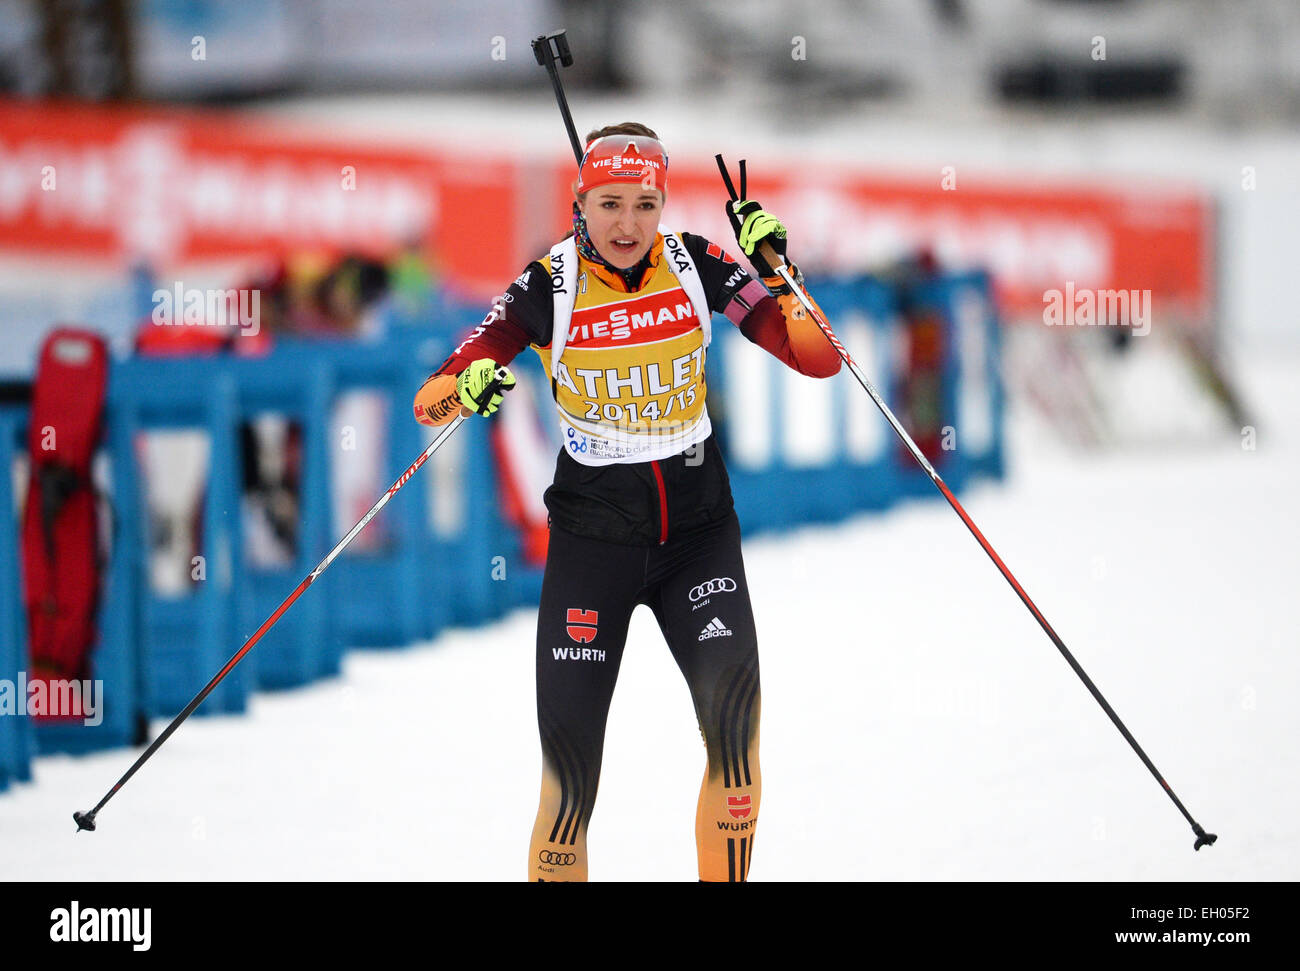 Kontiolahti, Finland. 04th Mar, 2015. German biathlete Luise Kummer in action during a training session at the Biathlon World Championships in Kontiolahti, Finland, 04 March 2015. Photo: Ralf Hirschberger/dpa/Alamy Live News Stock Photo